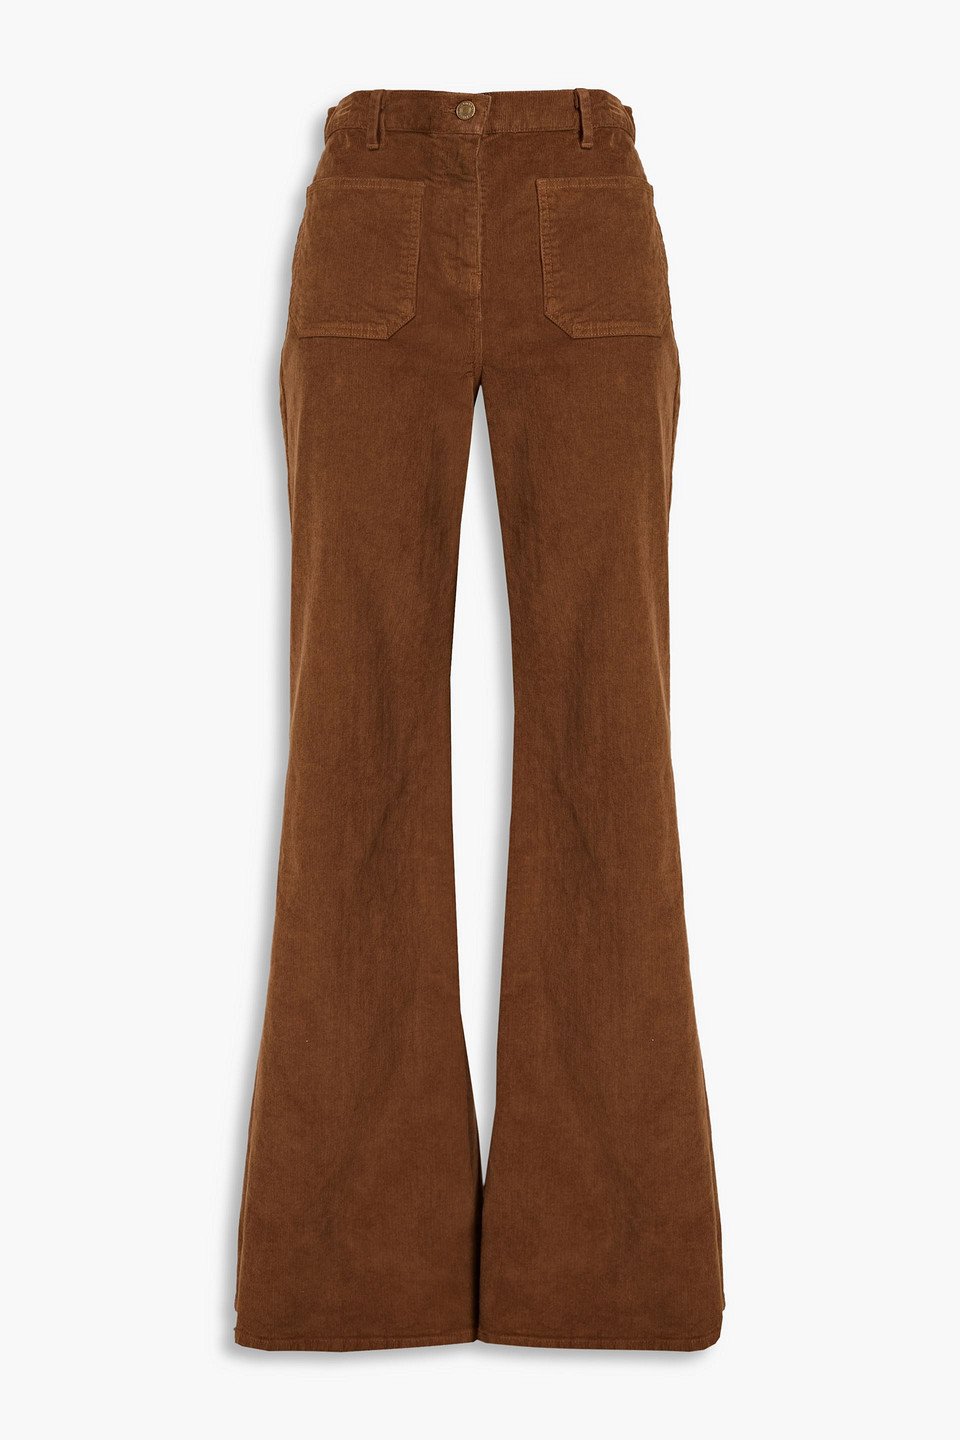 FRAME Le High Flare stretch-cotton flared pants